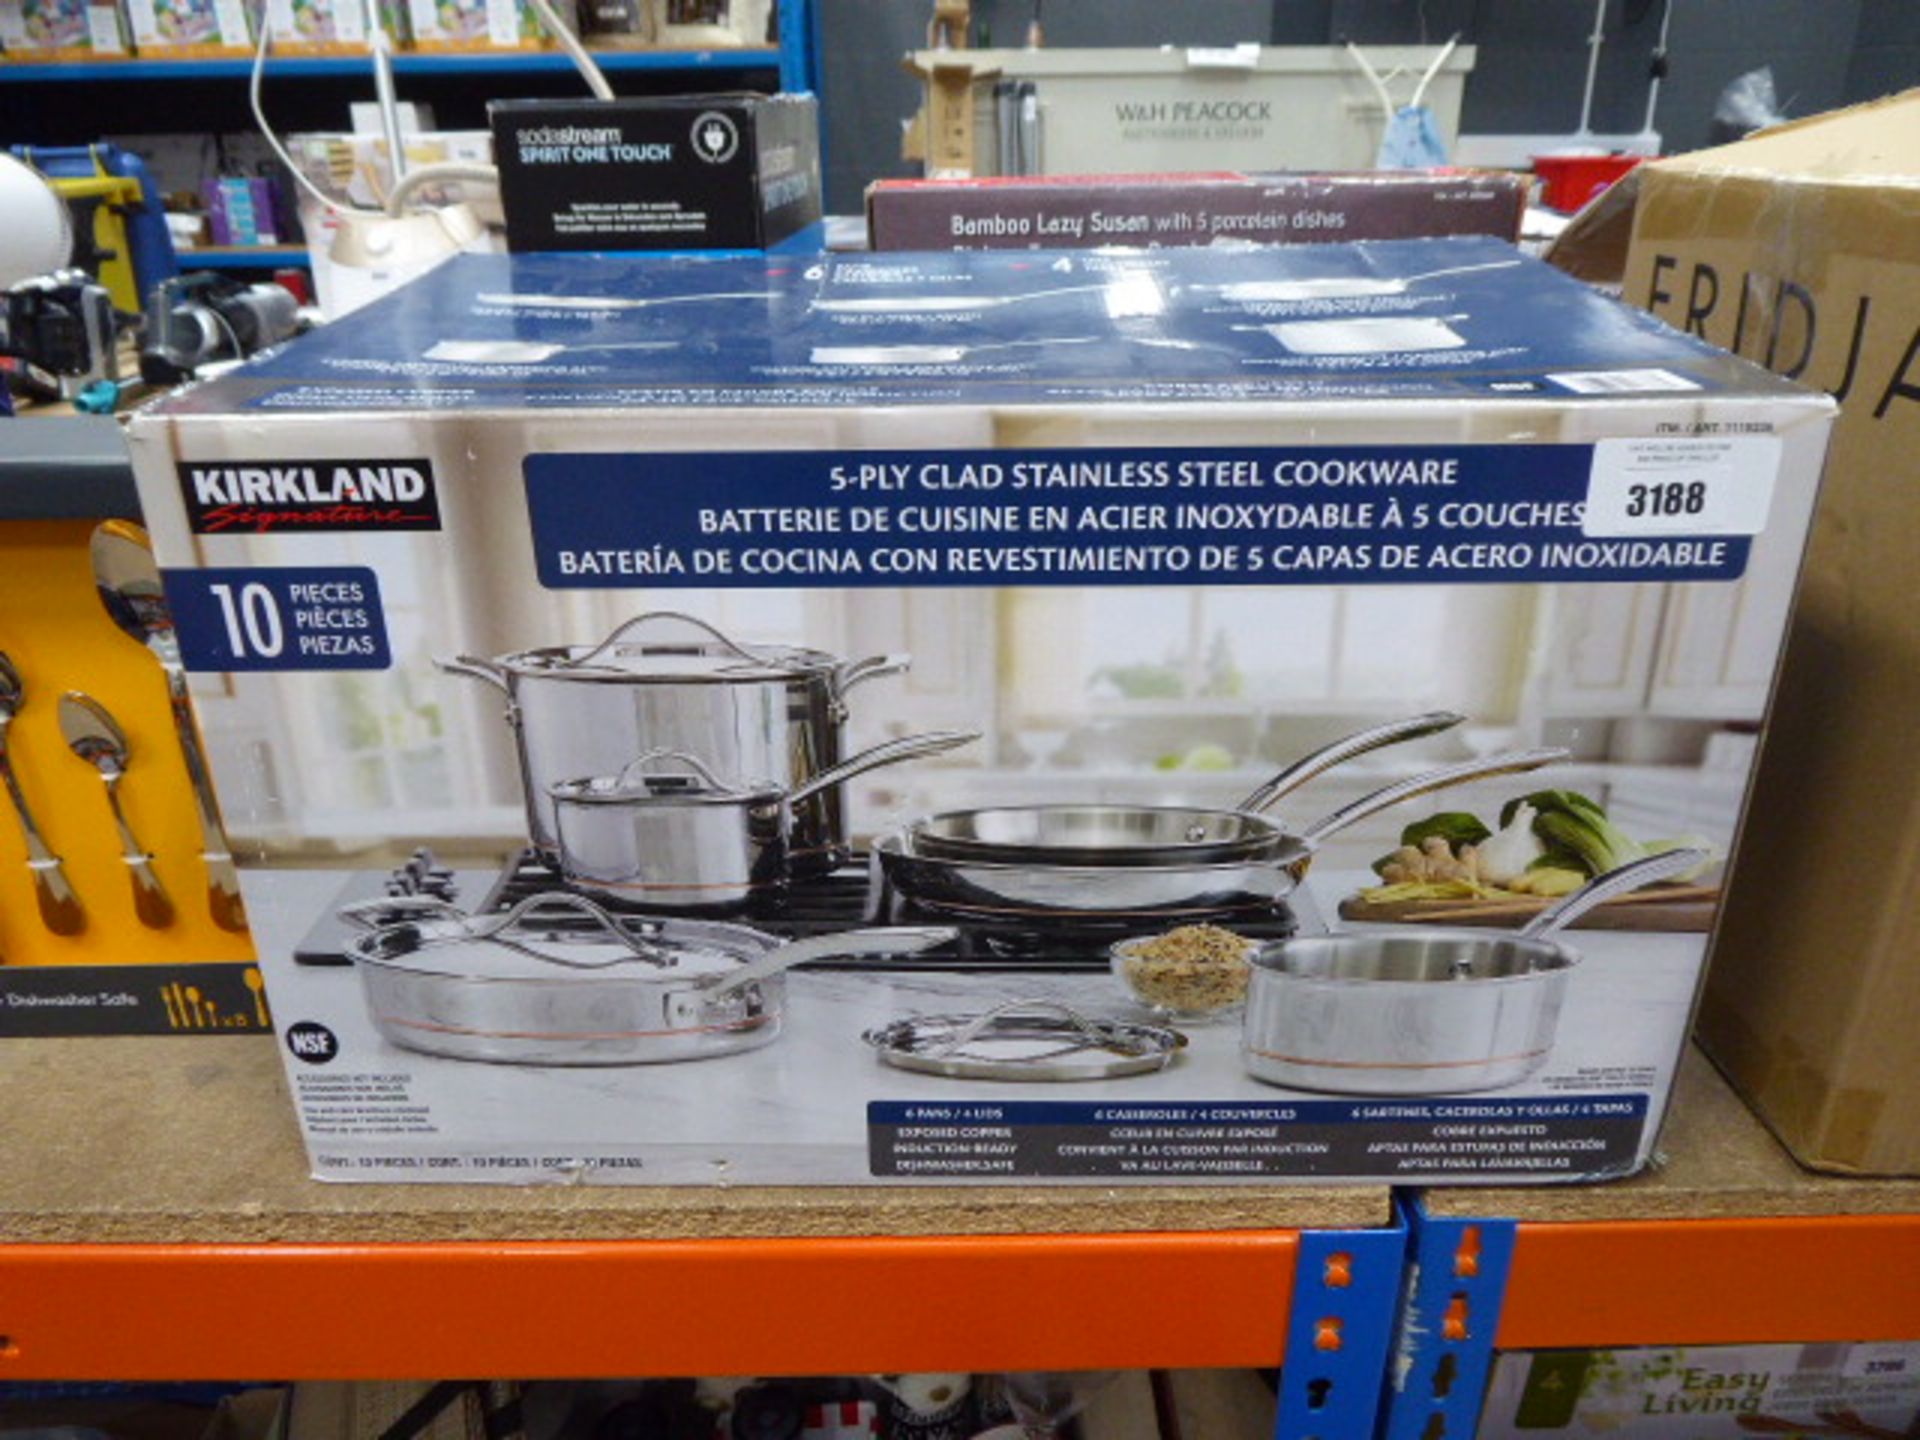 Boxed Kirkland stainless steel cookware set (used pots)